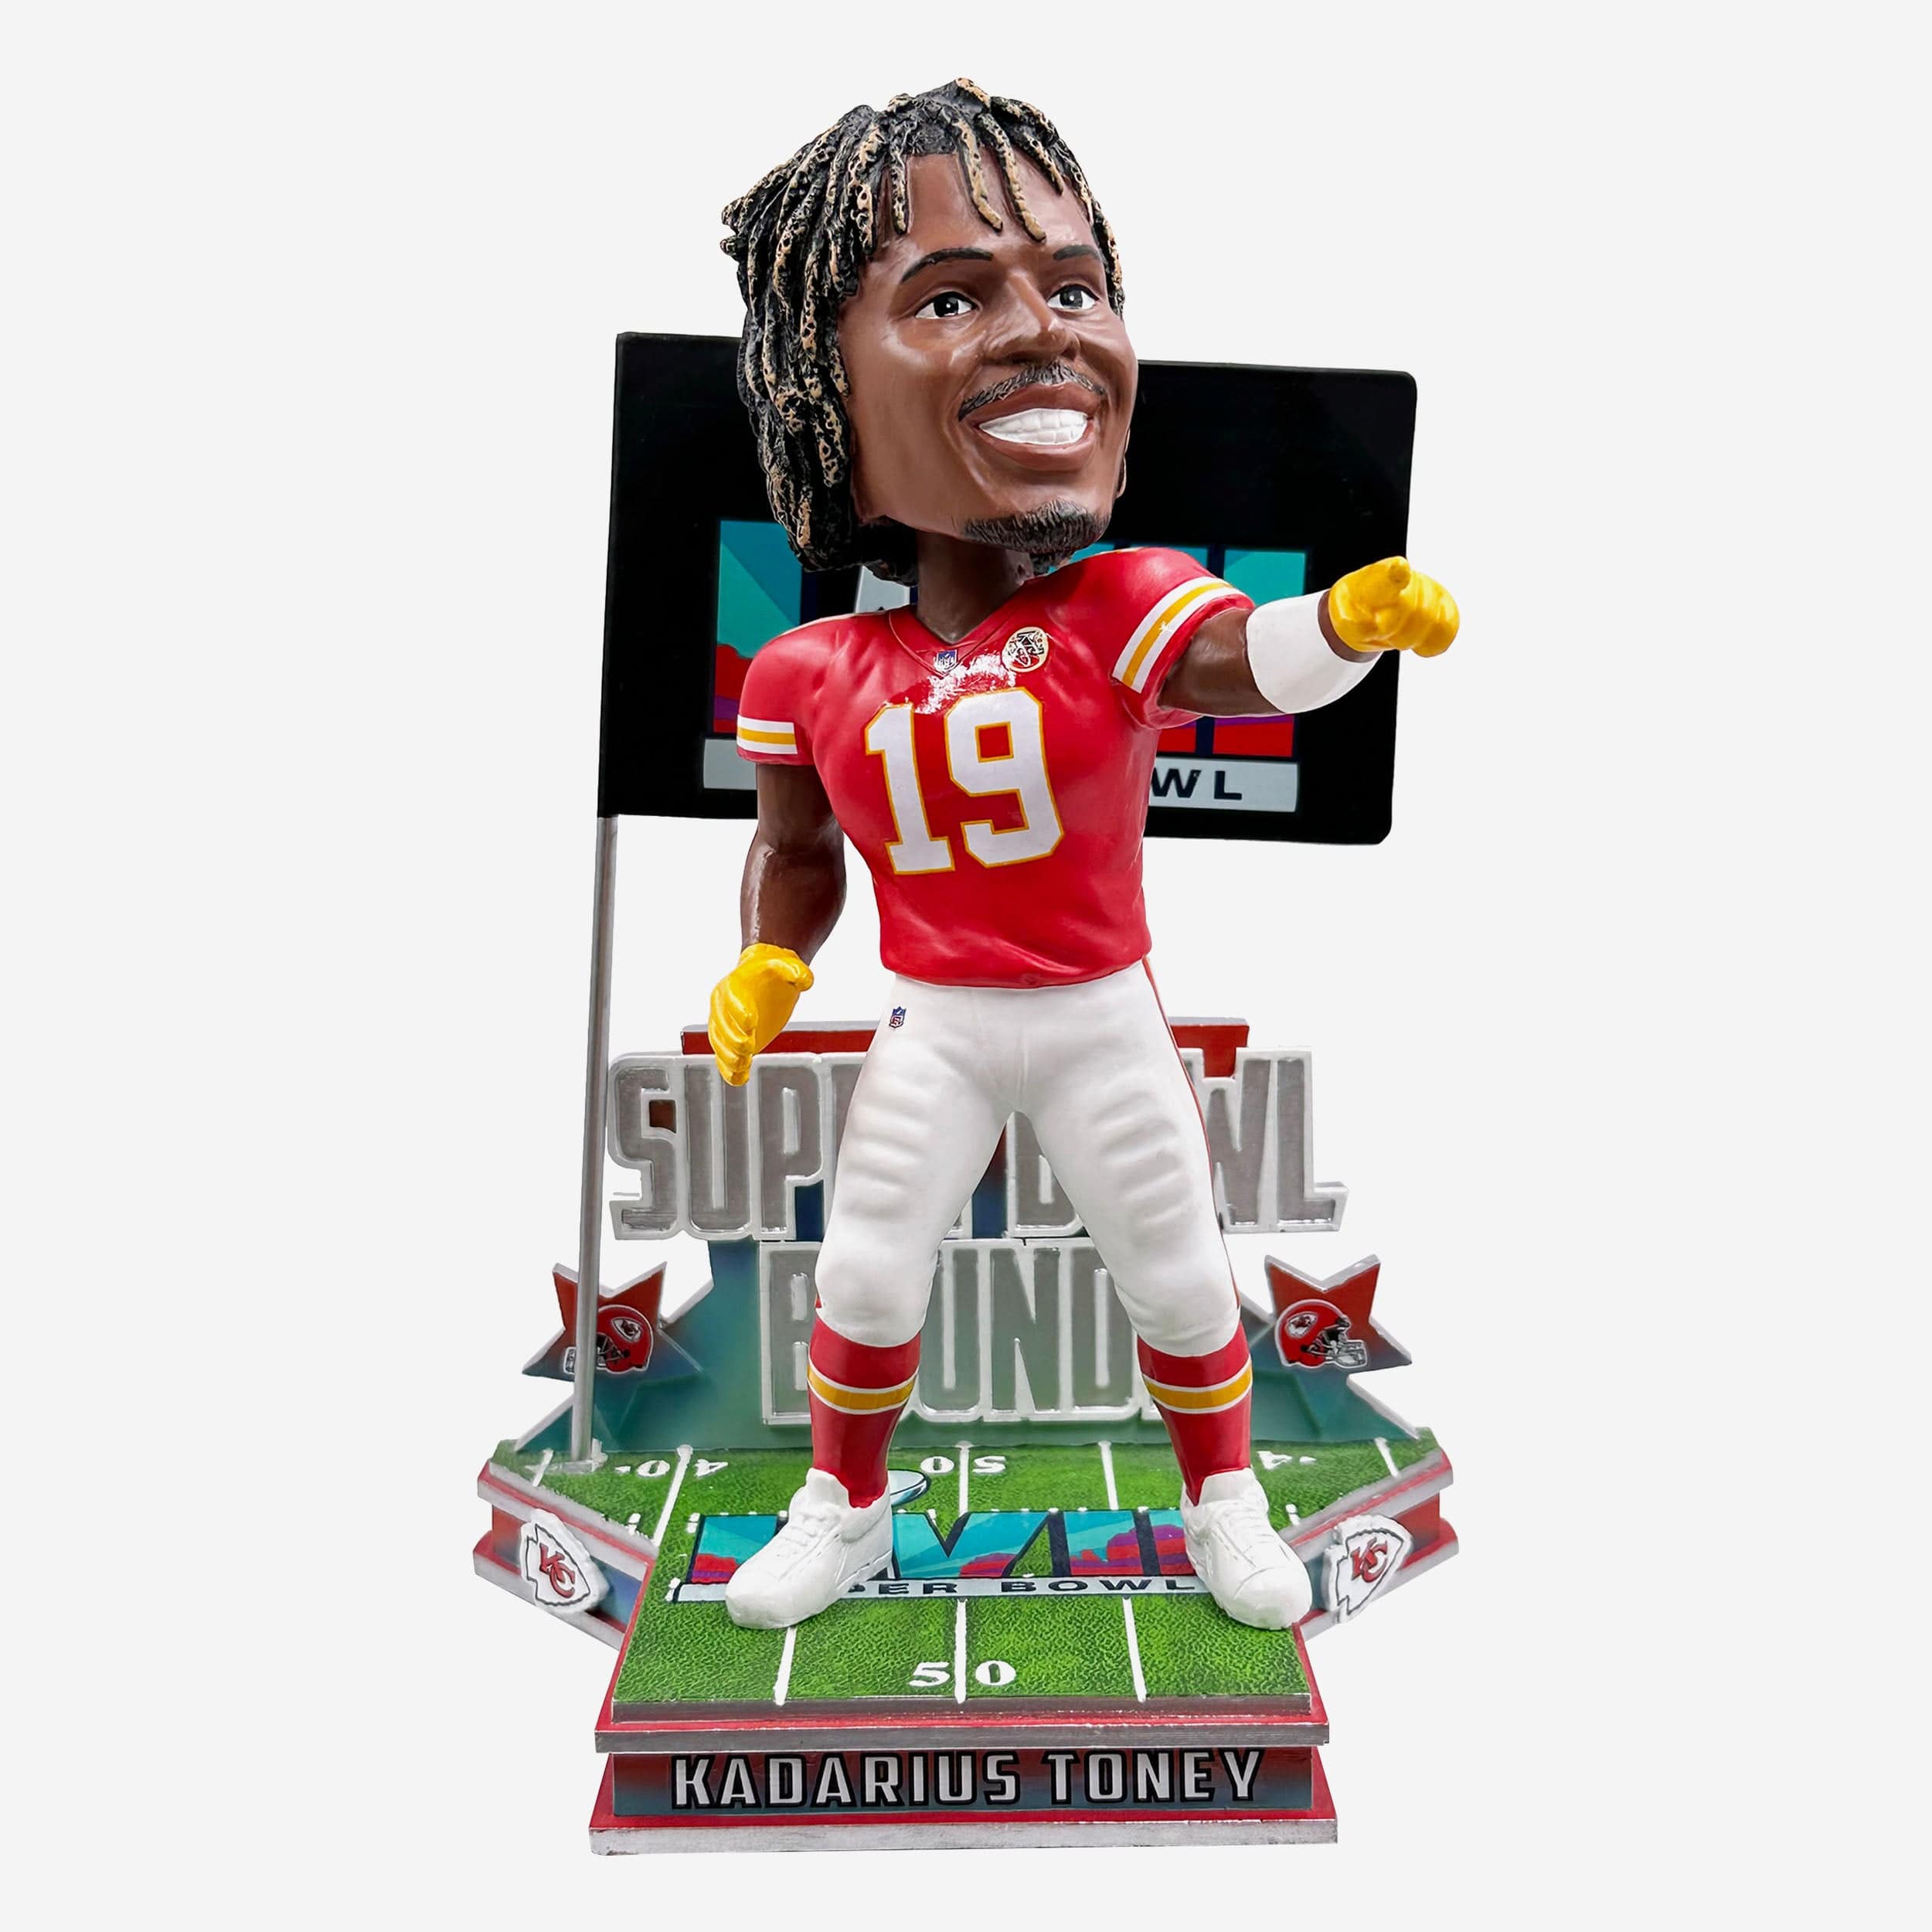 Kadarius Toney helps spur Chiefs to victory in 2023 Super Bowl